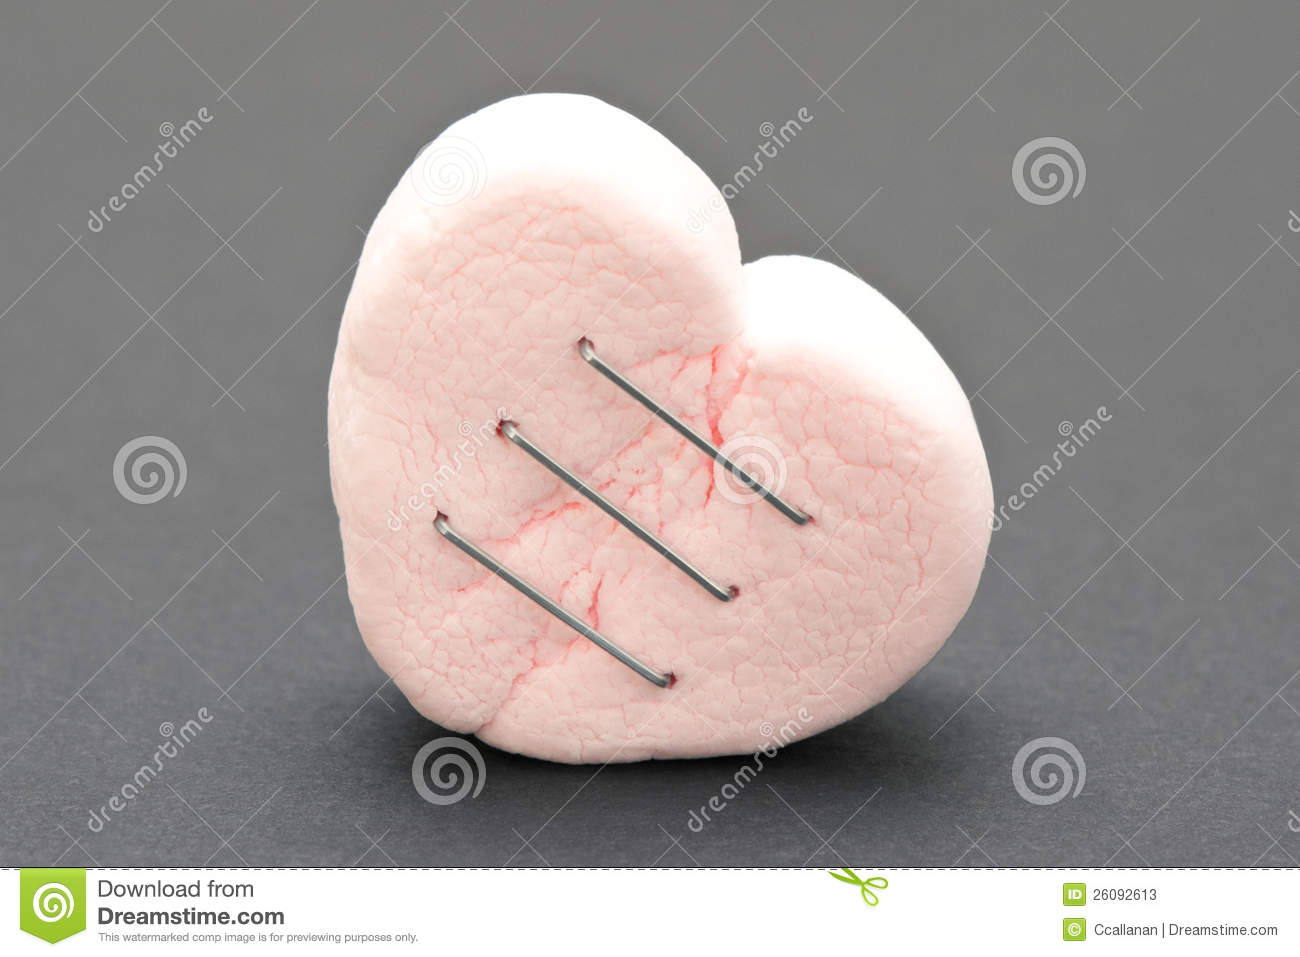 Mended Heart Stock Photos   Image  26092613